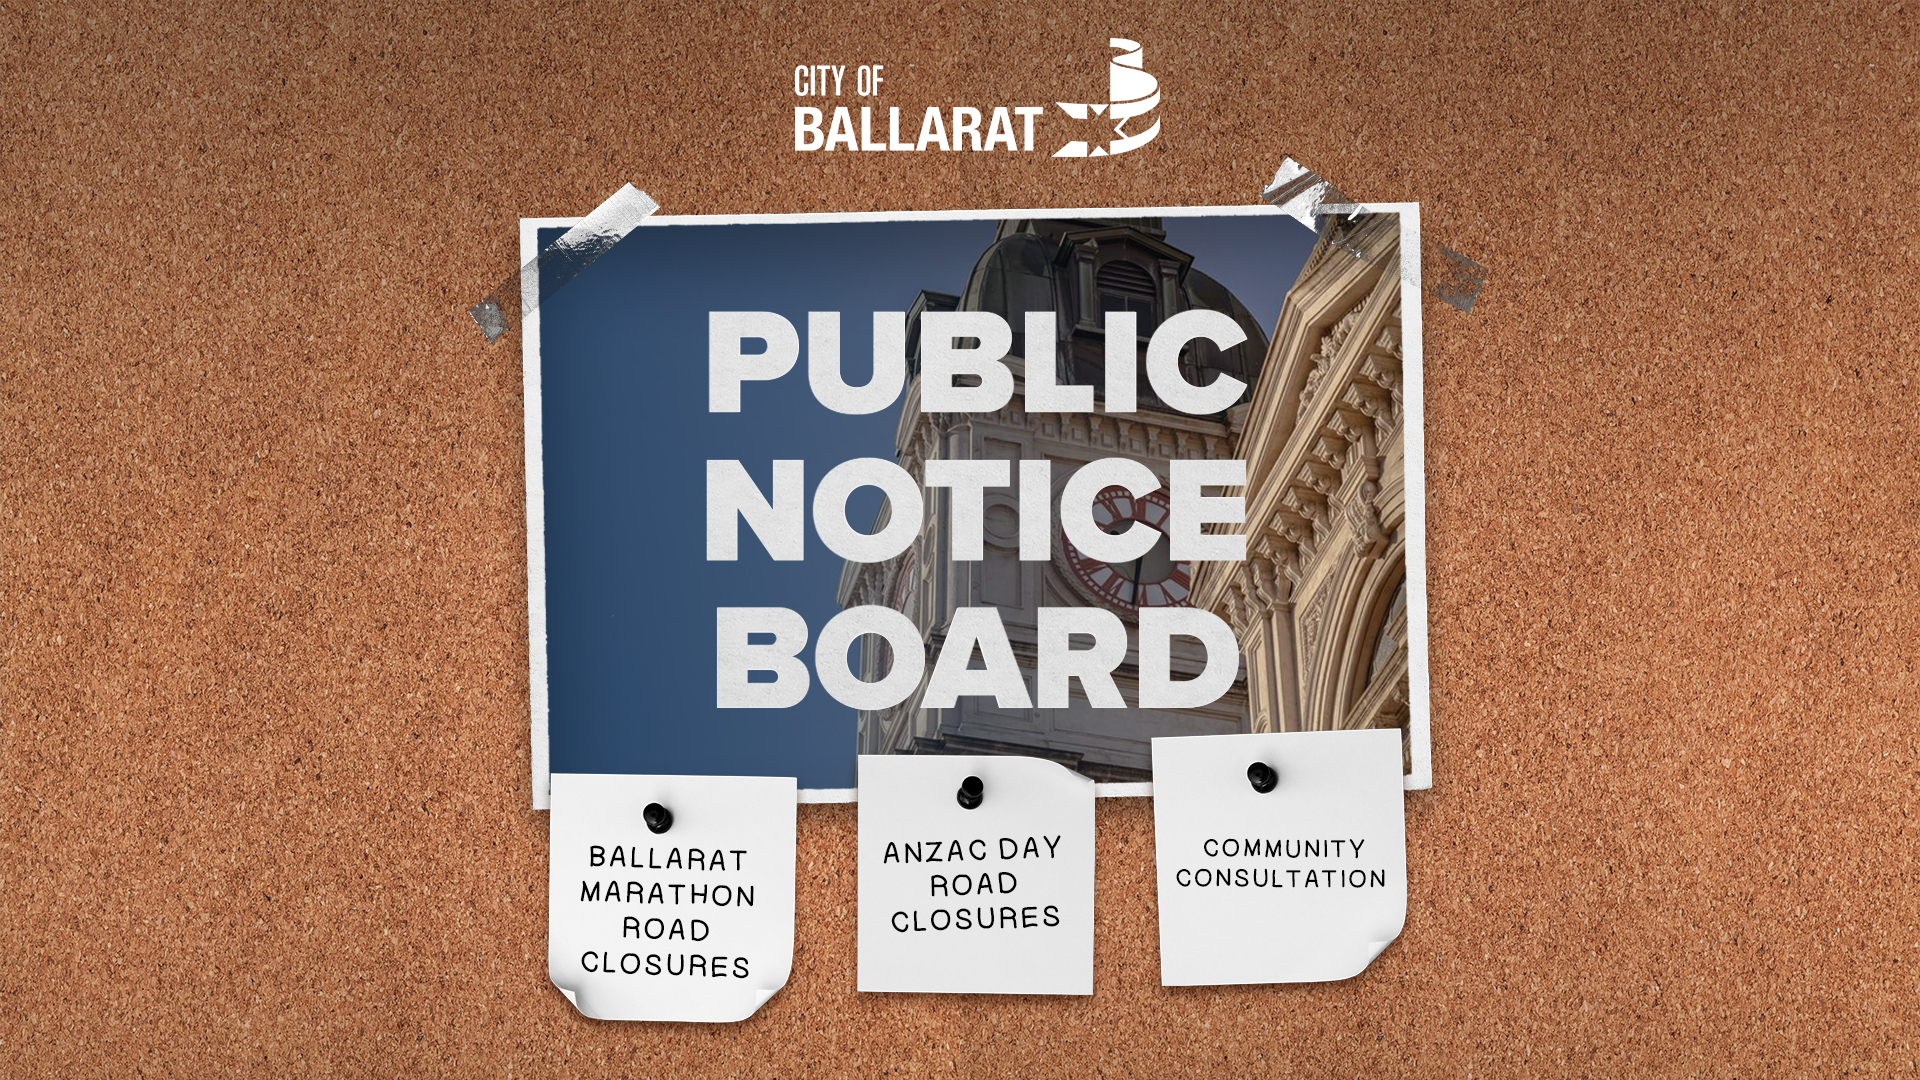 Notice board with Public Notice Board text over an image of Ballarat Town Hall. Three notes underneath with text saying Ballarat Marathon Road Closures, ANZAC Day Road Closures, Community Consultation